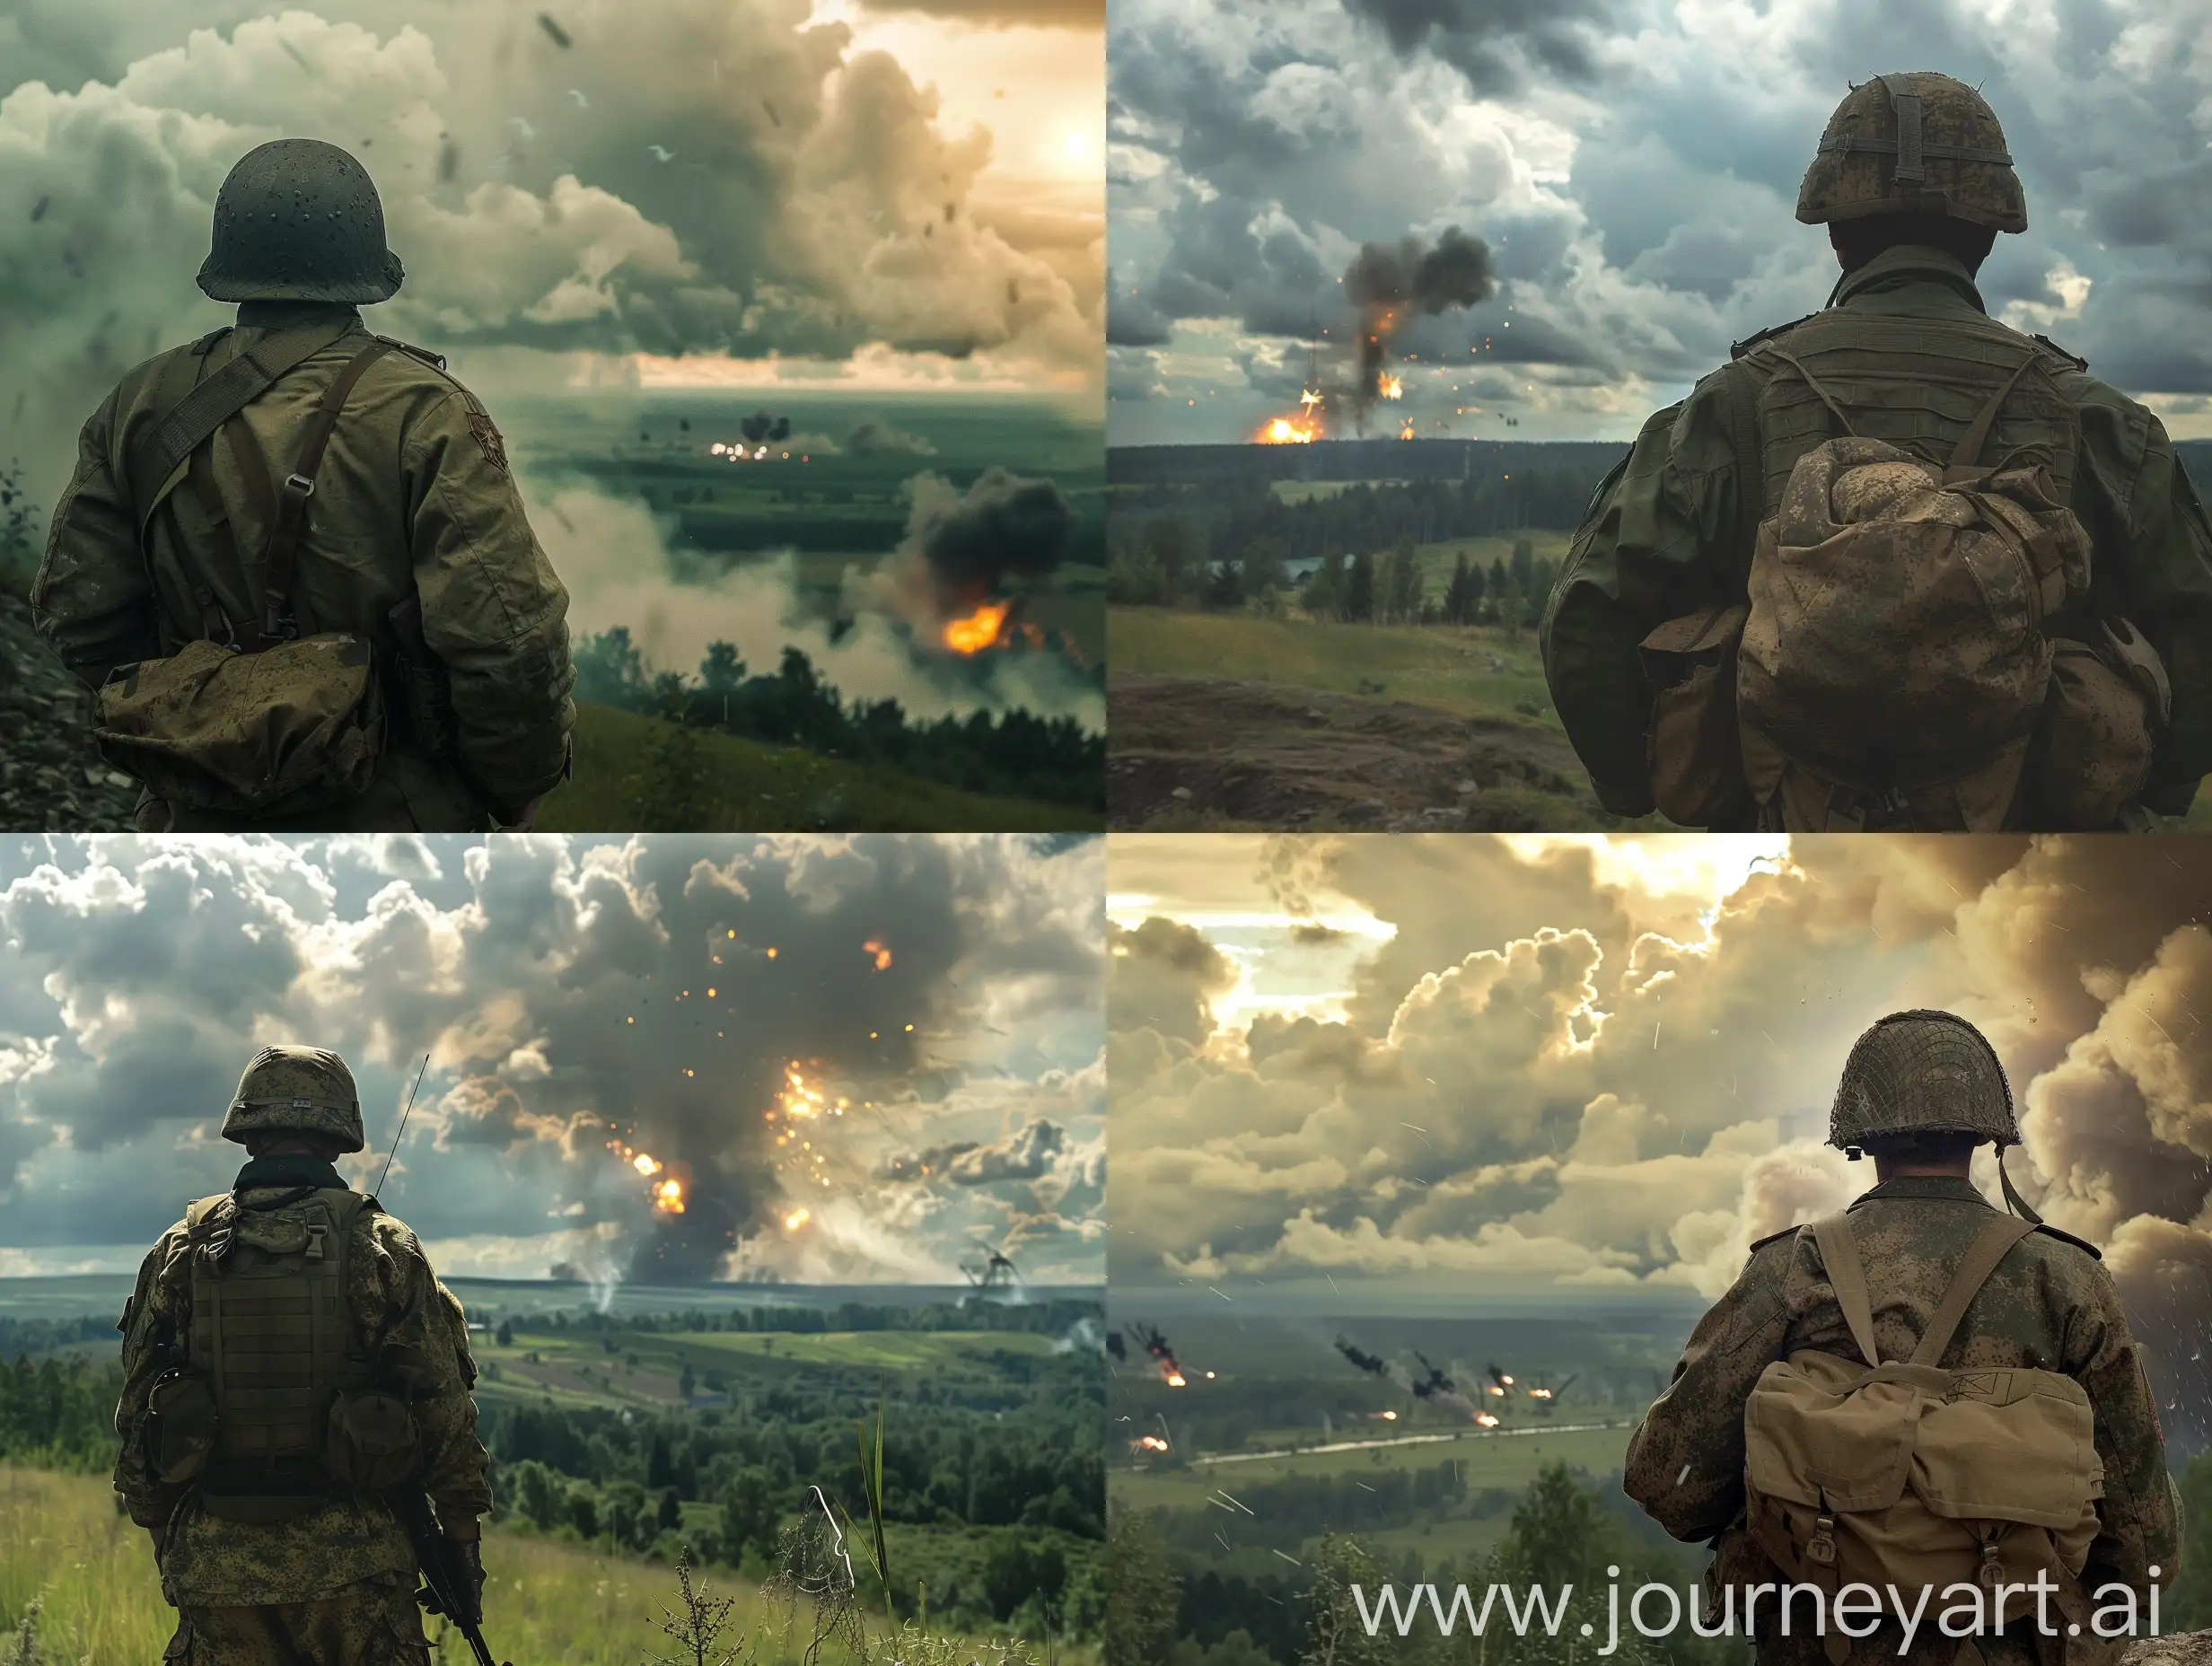 A Russian soldier is standing with his back to the clearing, everything is fine, everything is green. But in the distance, clouds begin to thicken and explosions can be seen